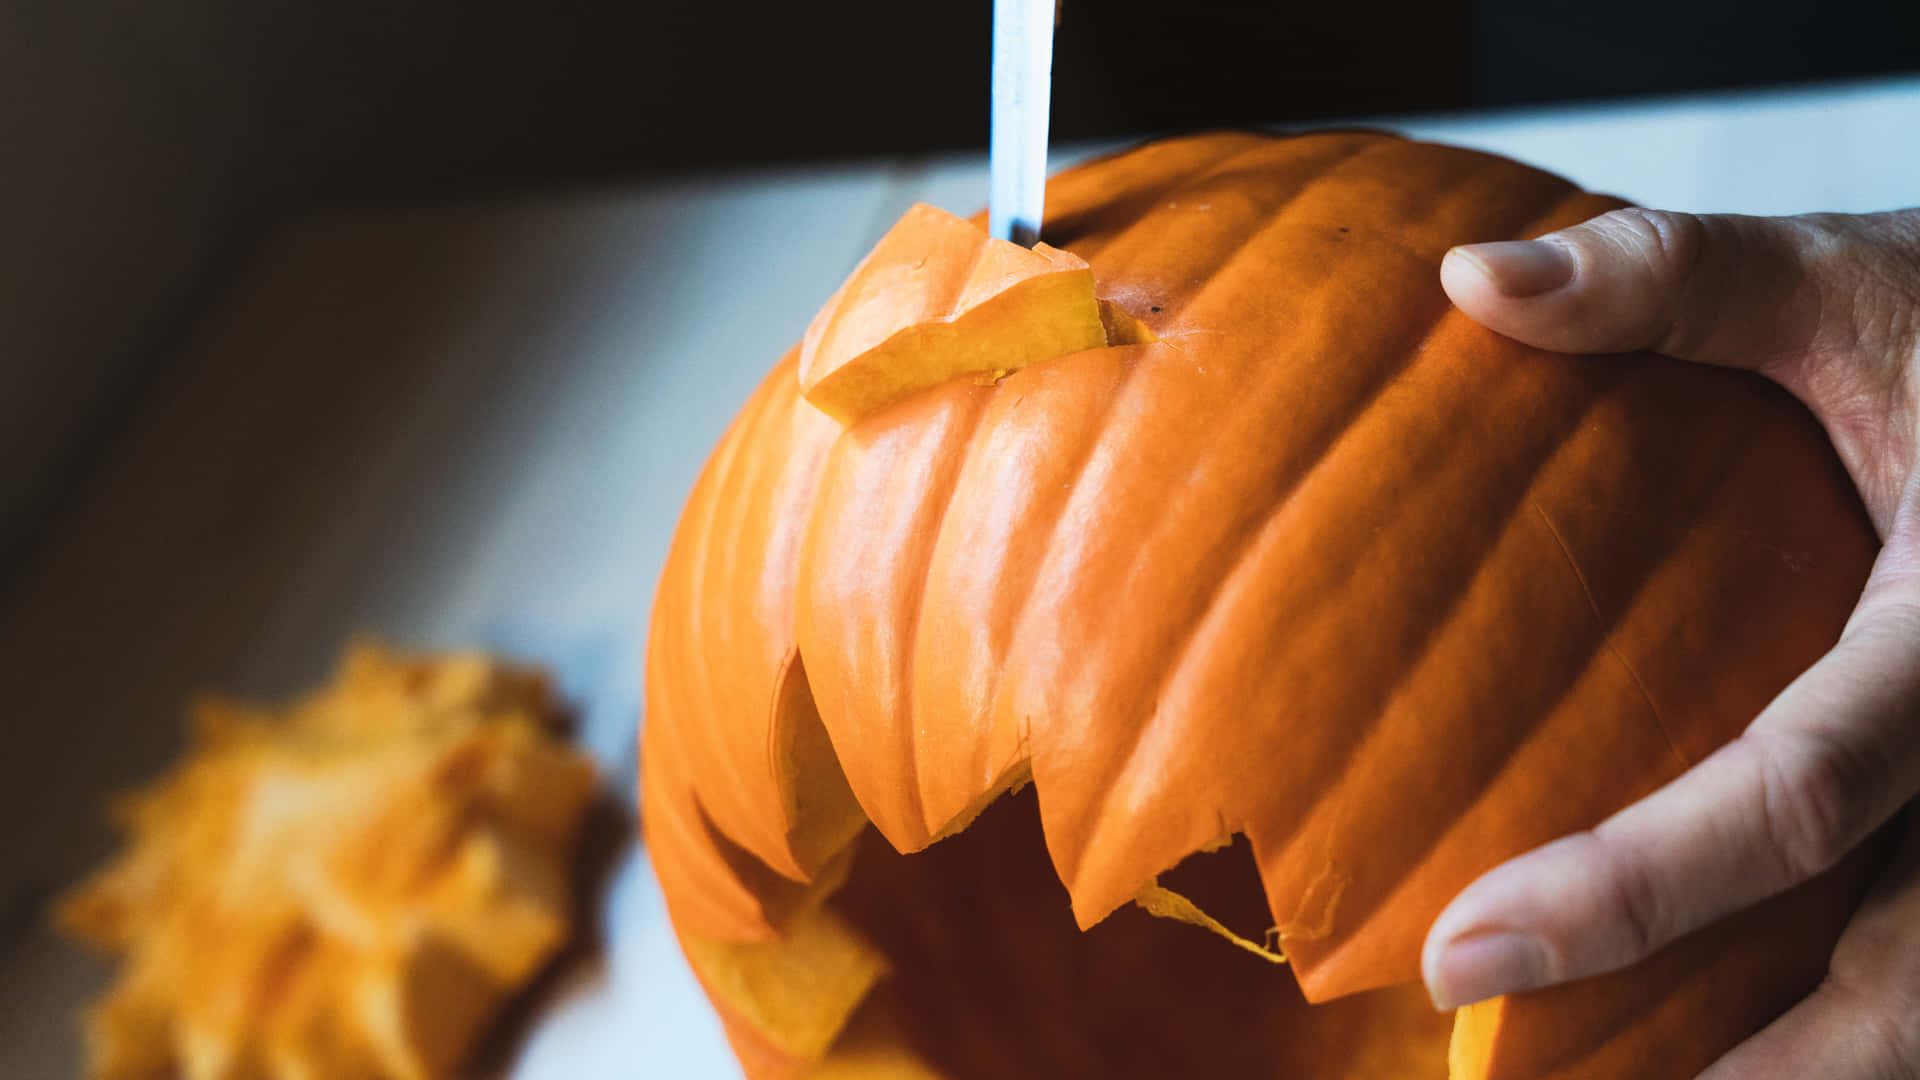 Pumpkin Carving With Knife Pictures